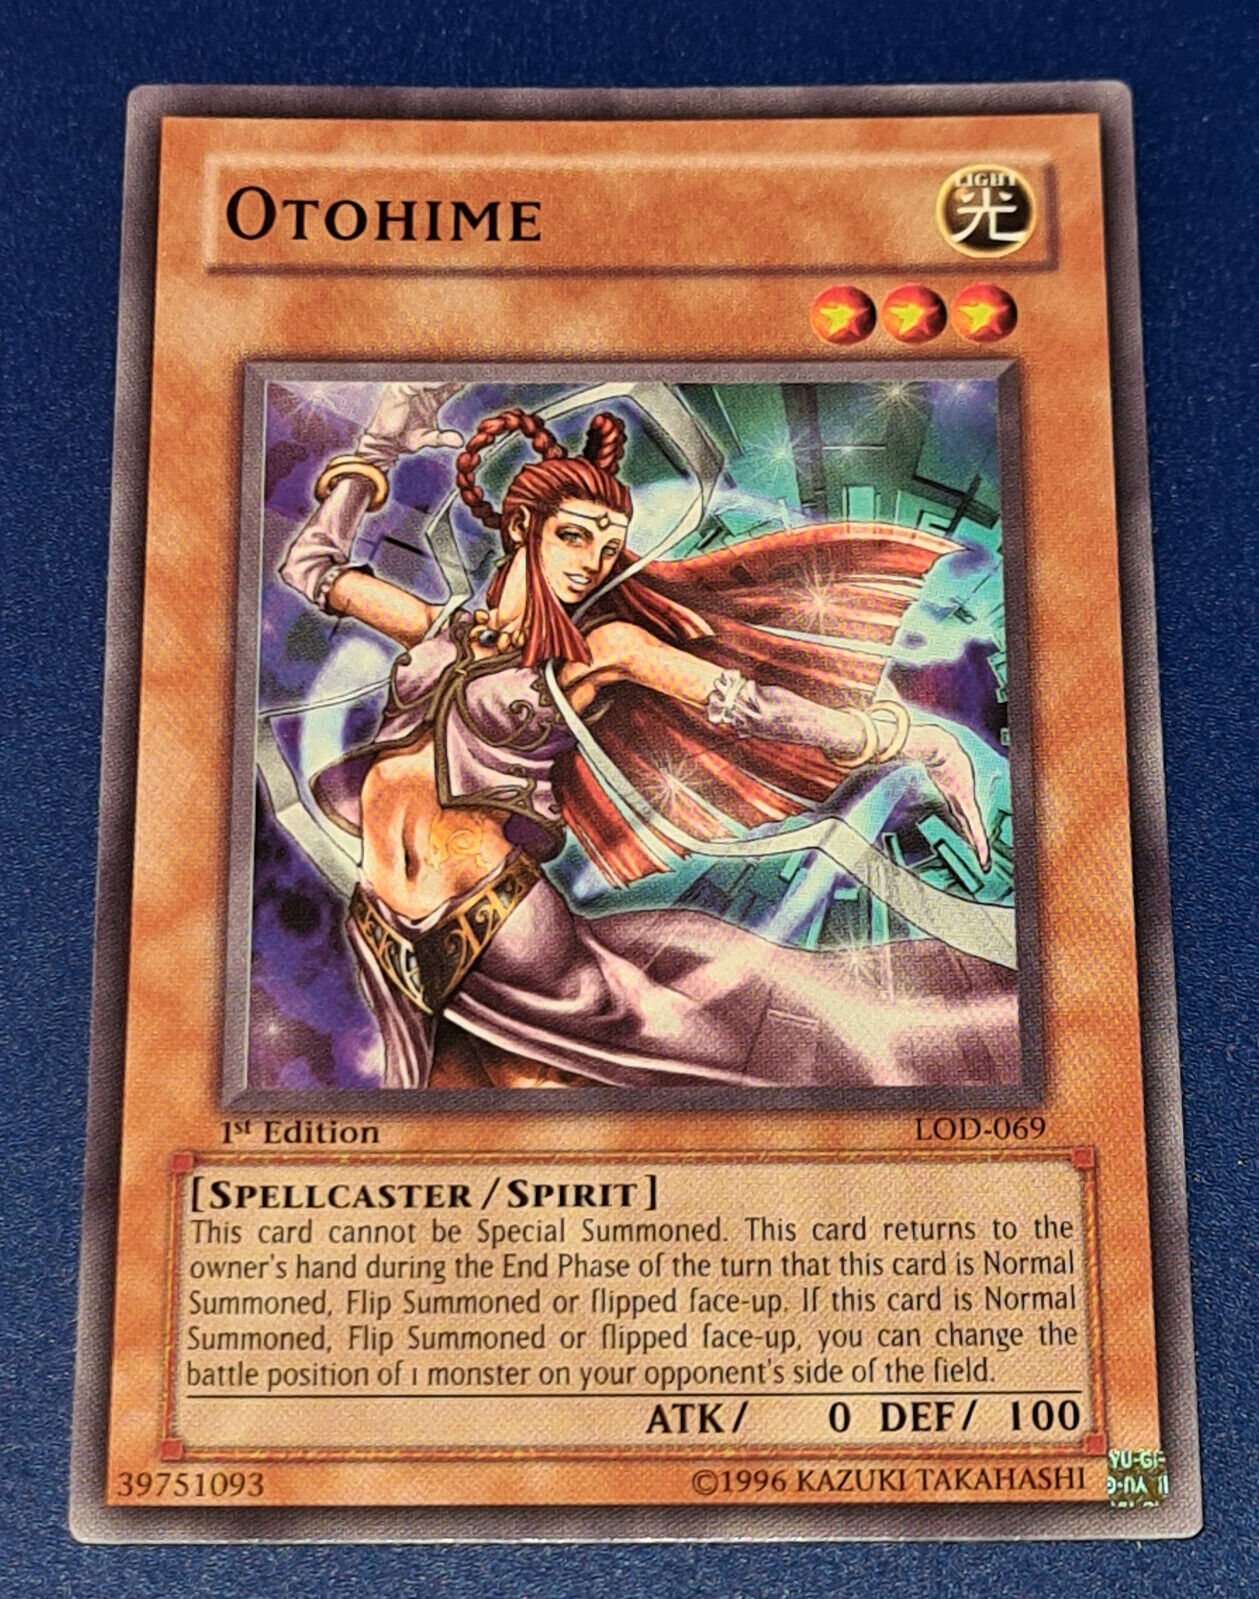 OTOHIME # LOD-069 Common 1st Edition Legacy of Darkness 2003 EN Near Mint Vintage